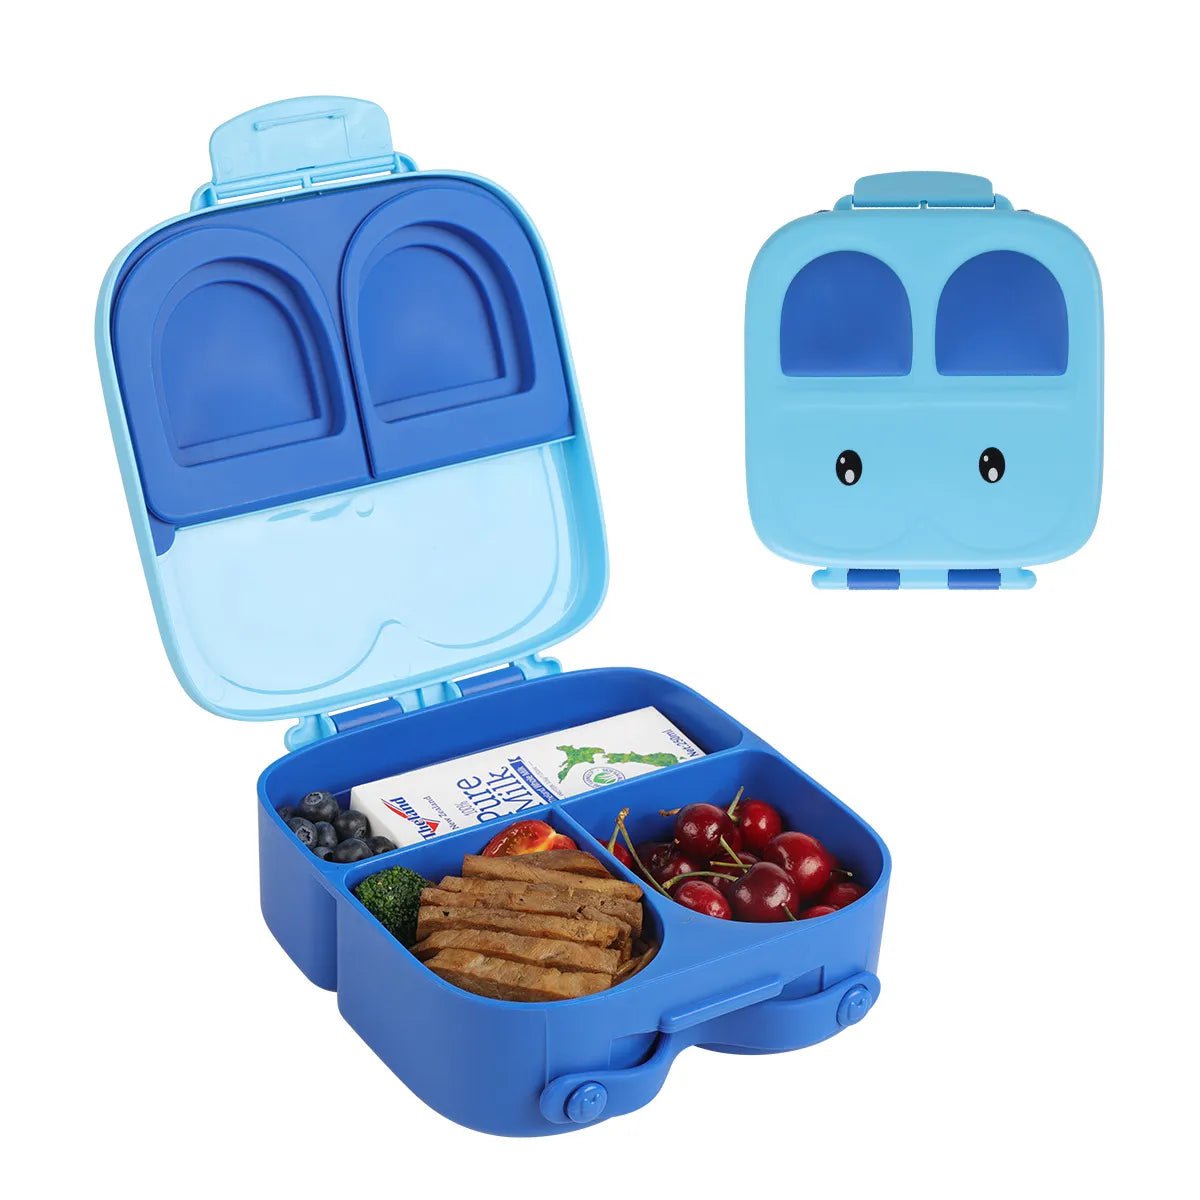 Portable Microwave Lunch Box with 4 Compartments - Ideal for Adults, Kids, and Toddlers. Sealed Salad Box for Picnics and Food Storage Blue